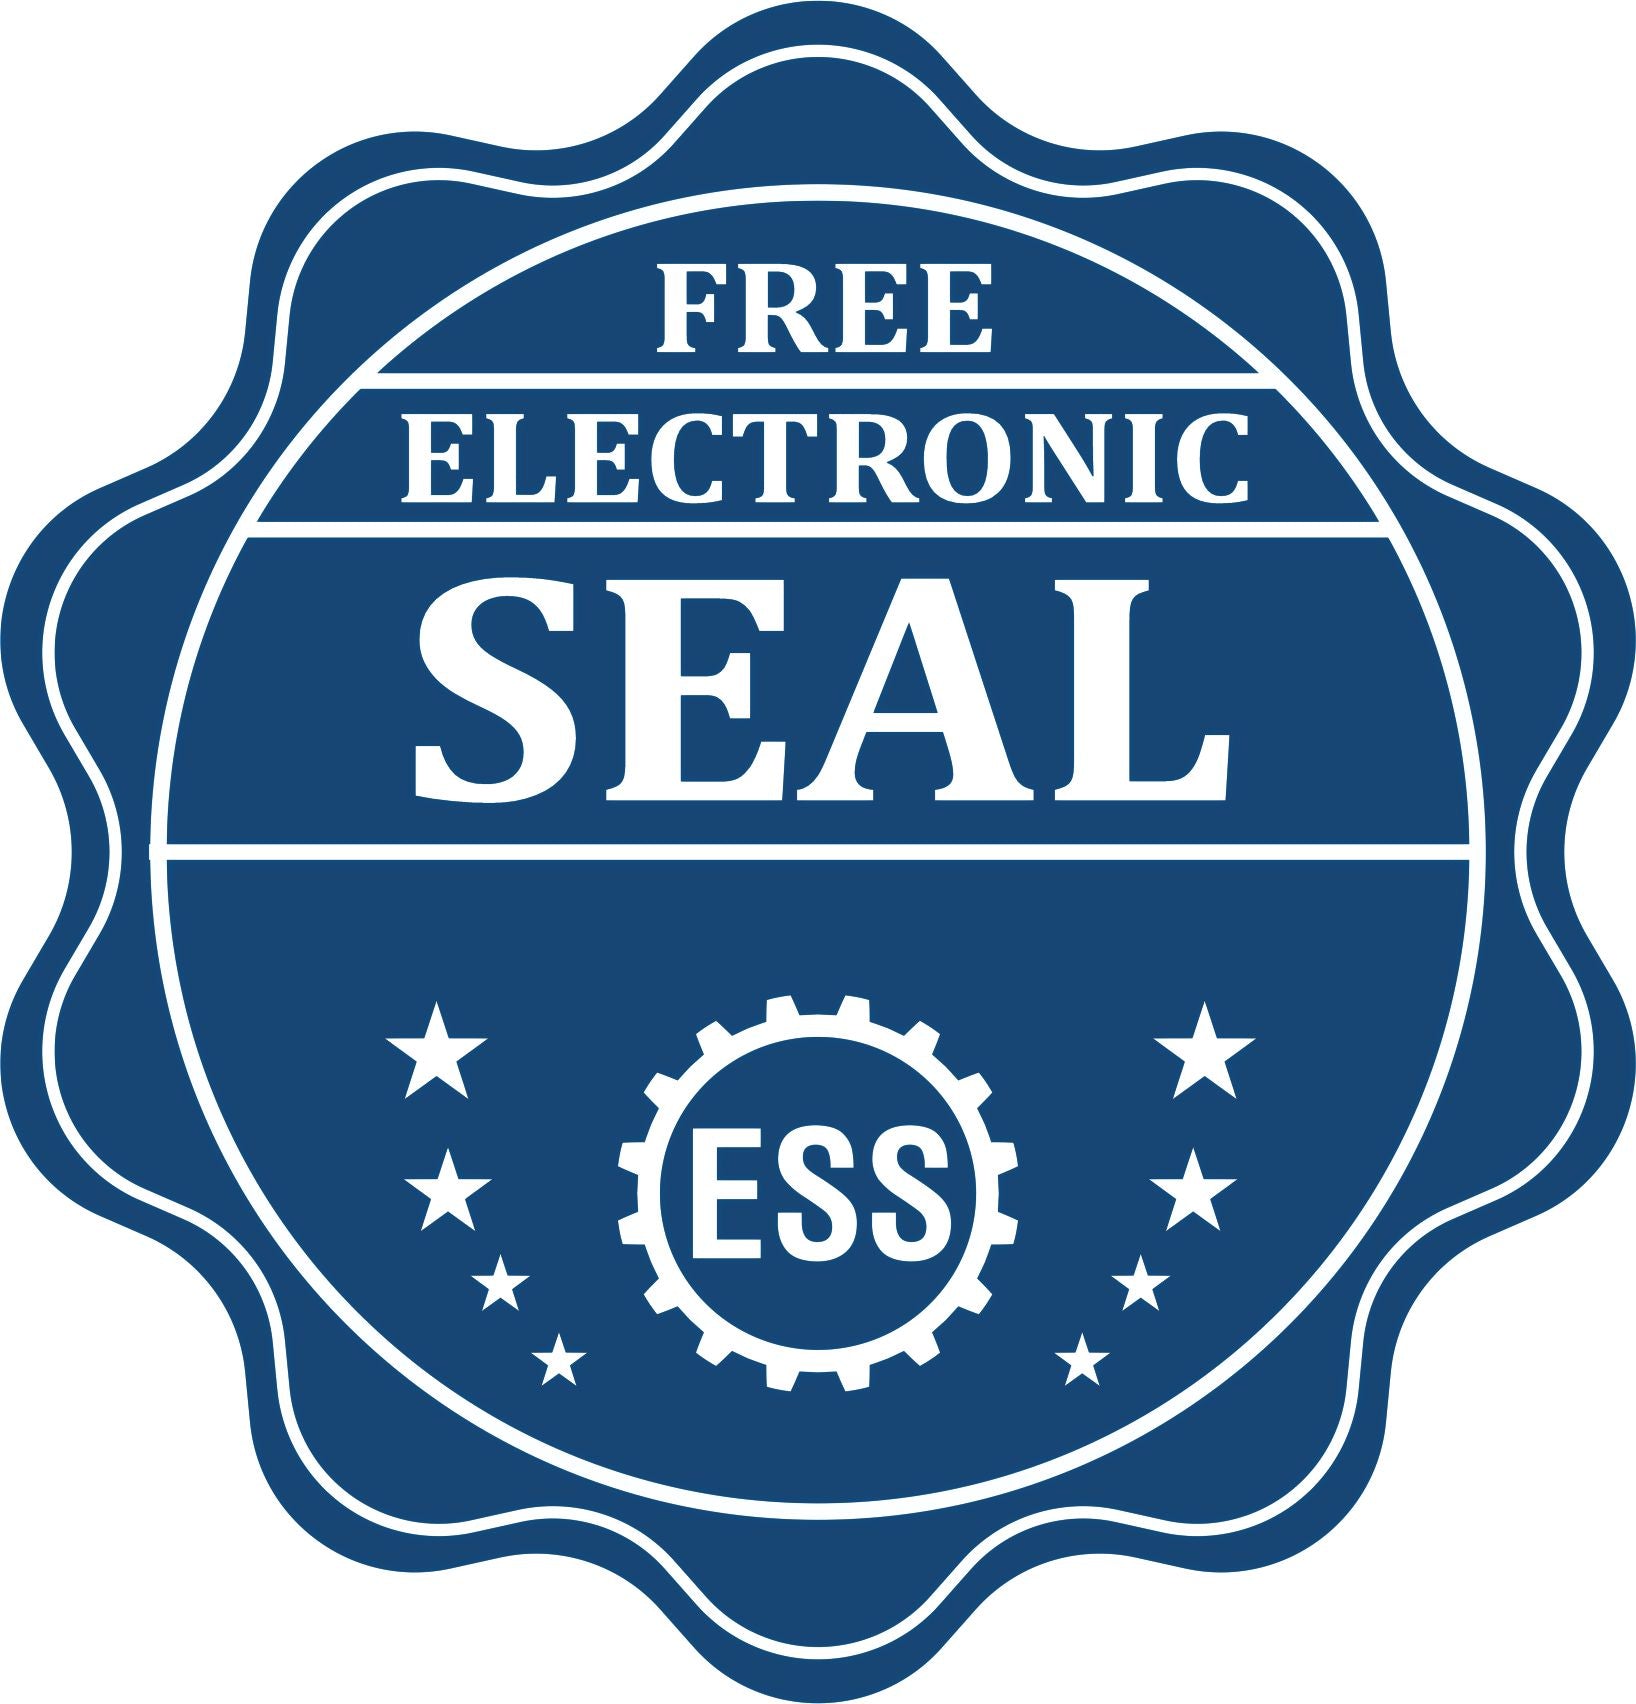 A badge showing a free electronic seal for the Slim Pre-Inked West Virginia Professional Geologist Seal Stamp with stars and the ESS gear on the emblem.